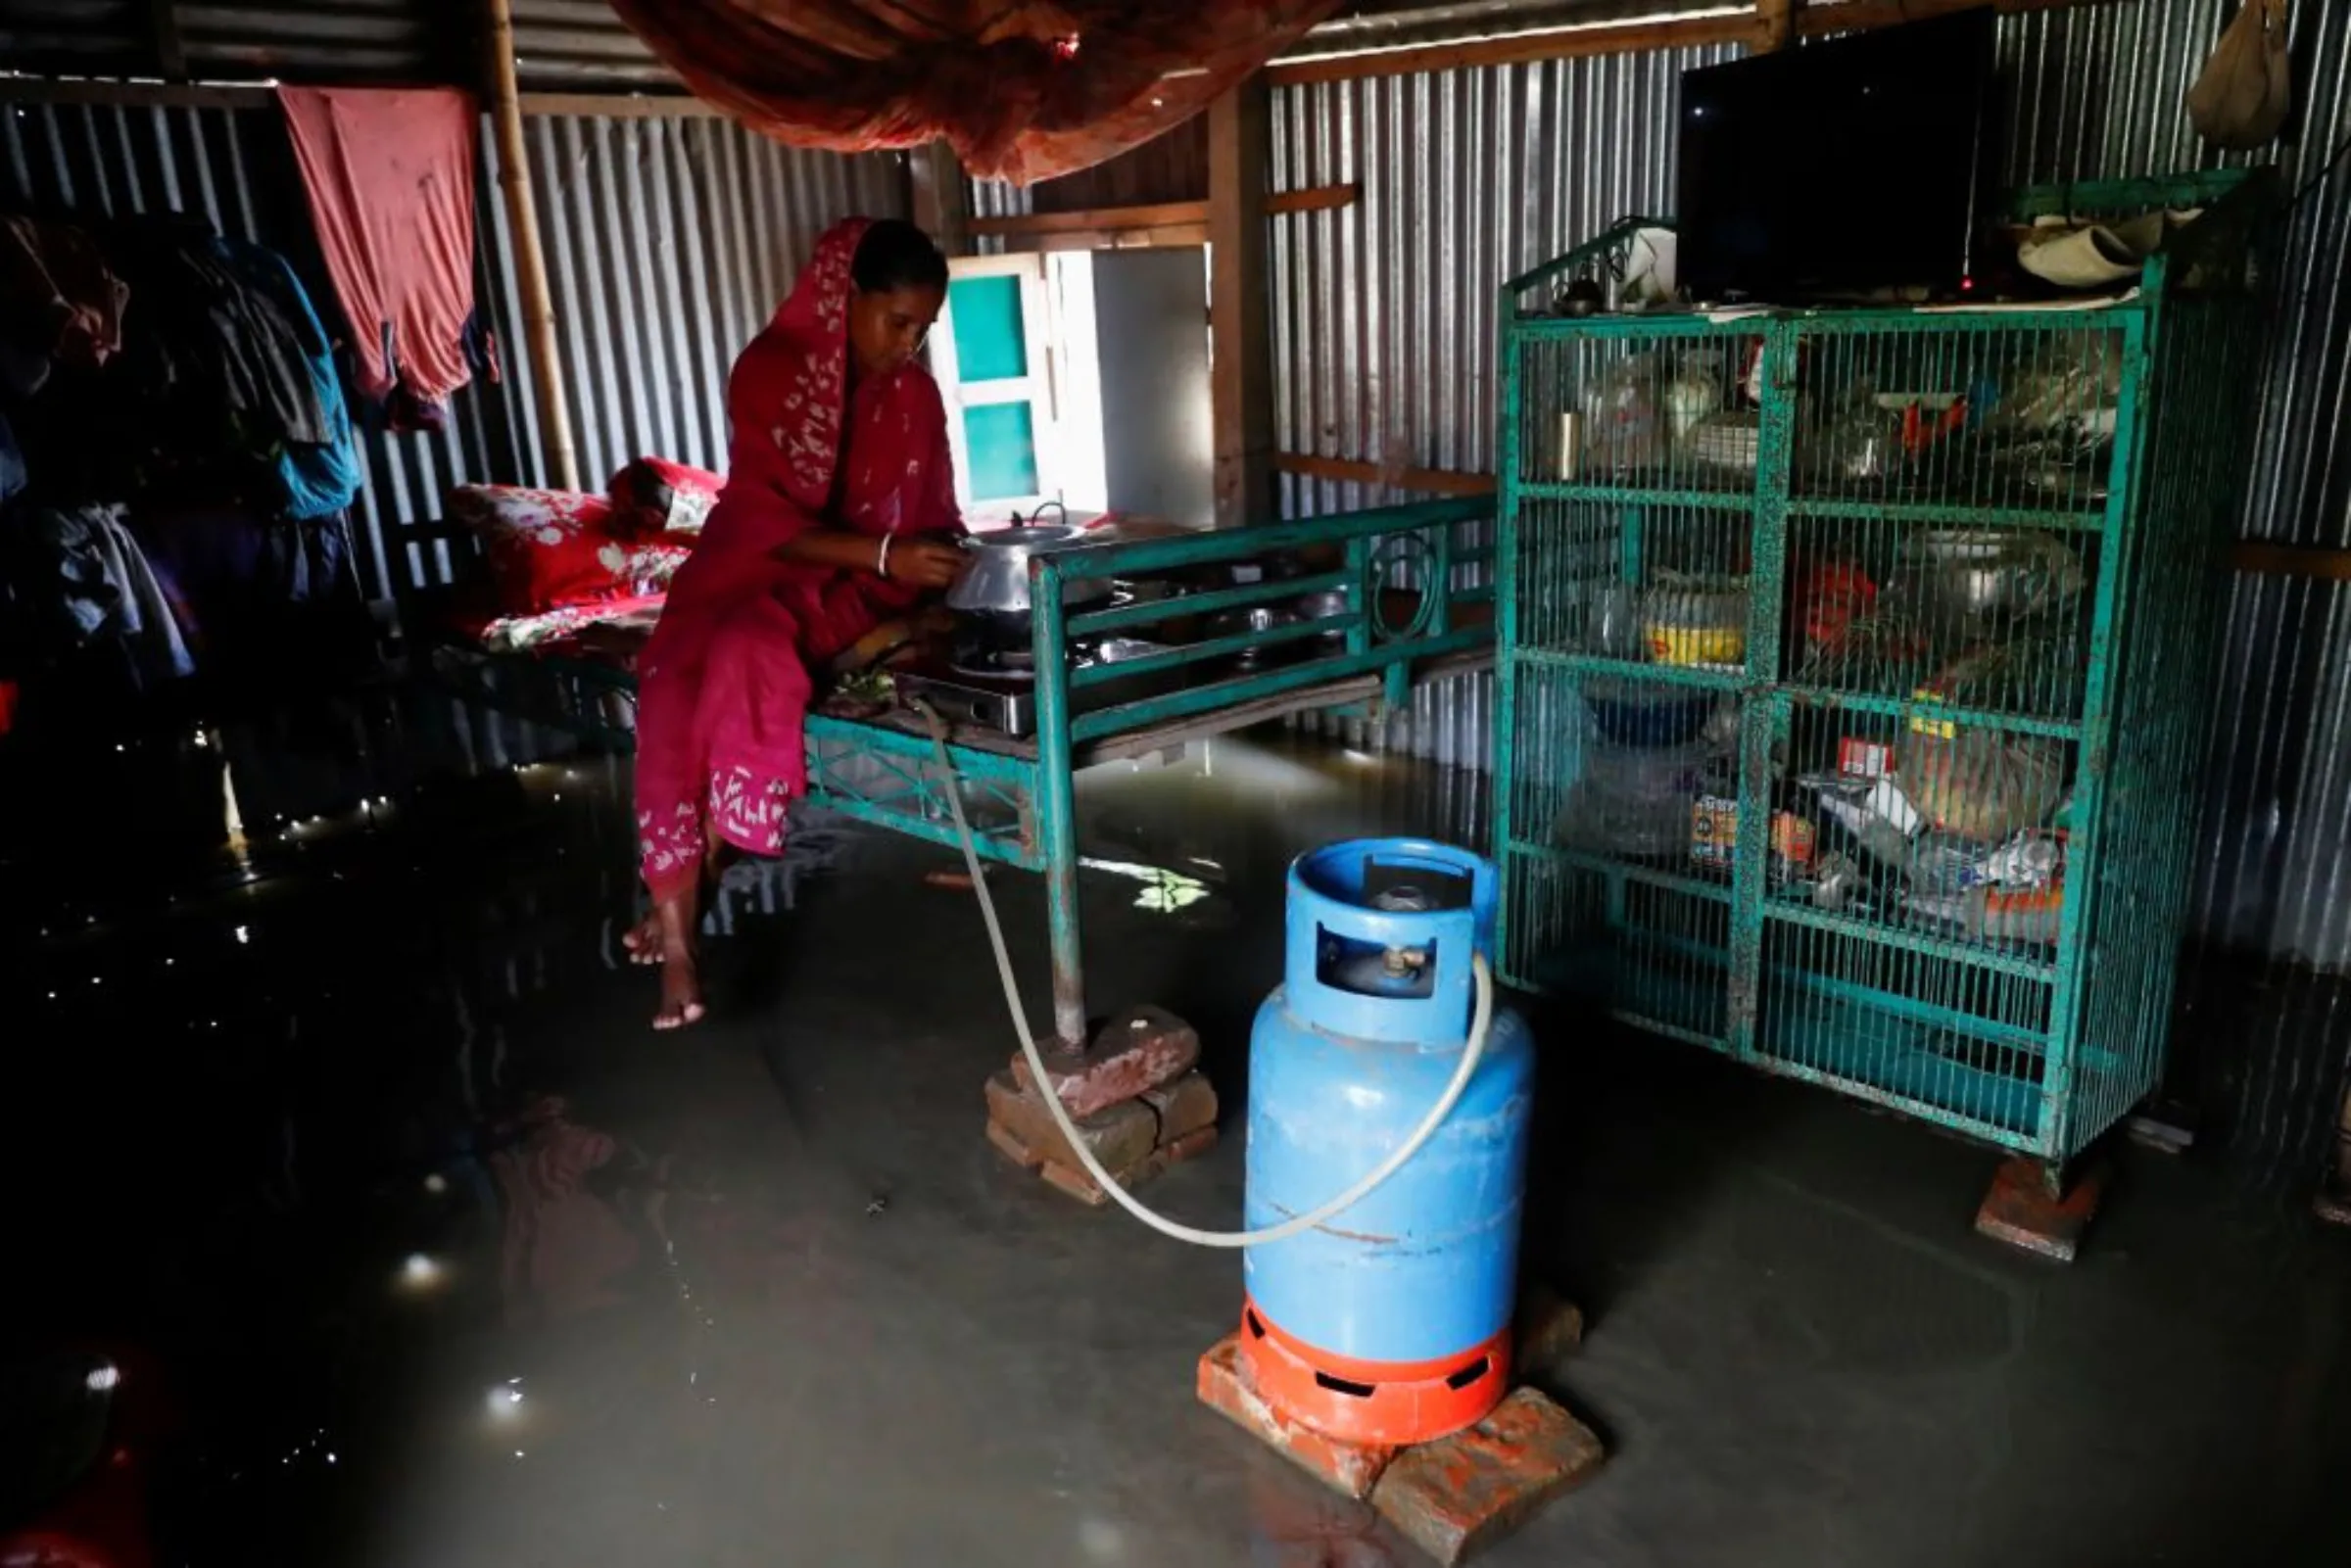 A flood-affected woman uses liquid petroleum gas to cook a meal inside her flooded house in Jamalpur, Bangladesh, July 18, 2020